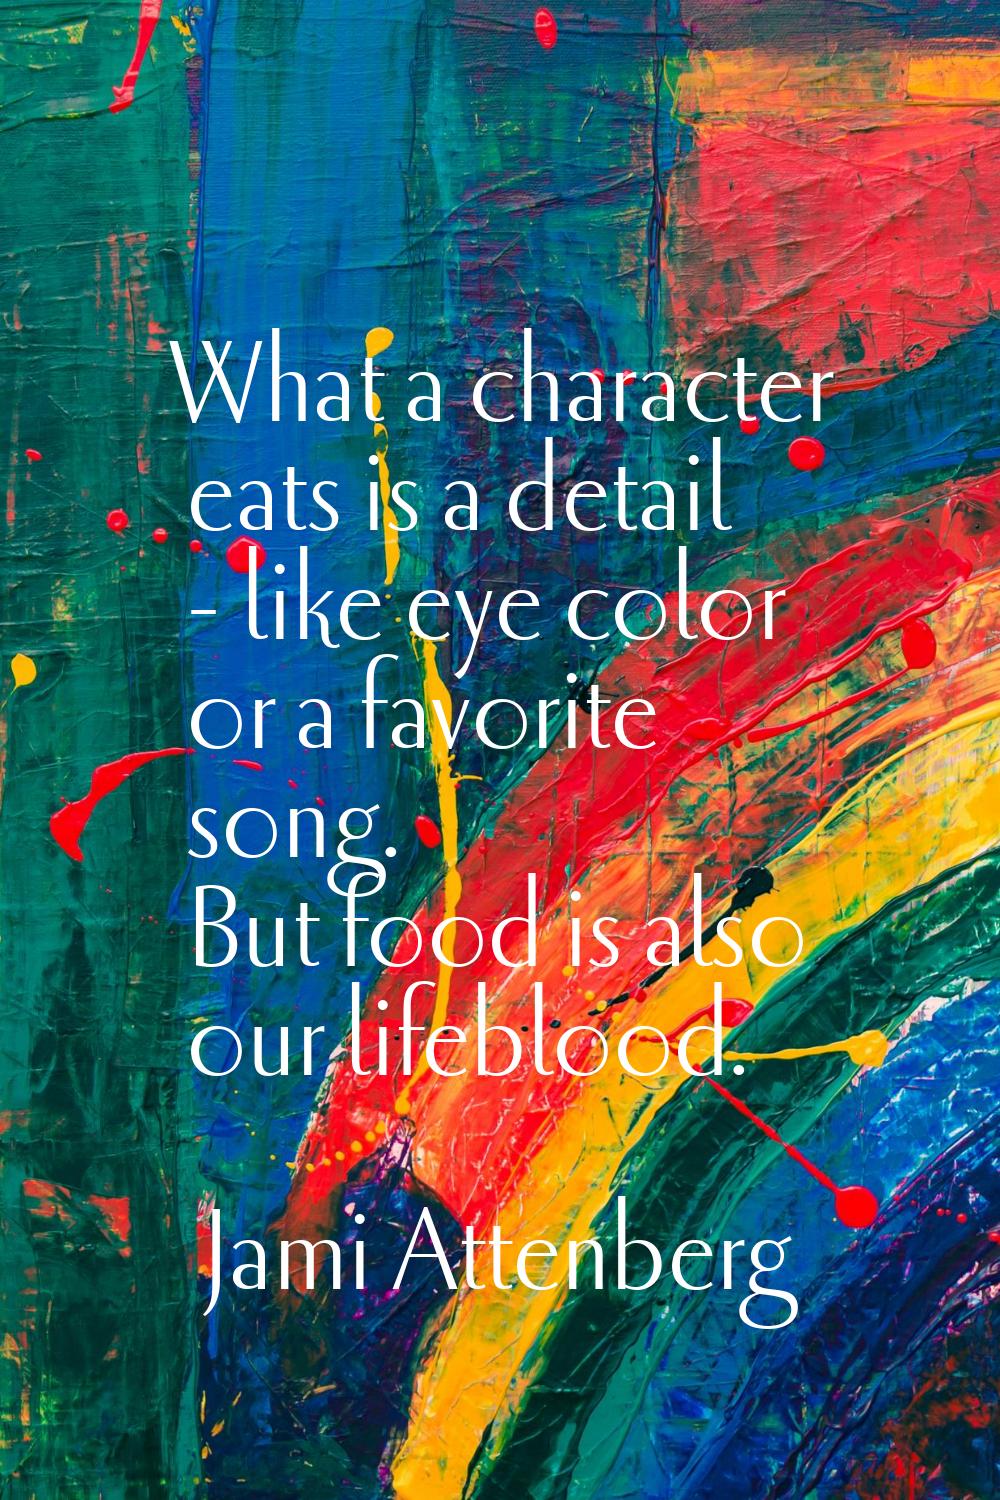 What a character eats is a detail - like eye color or a favorite song. But food is also our lifeblo